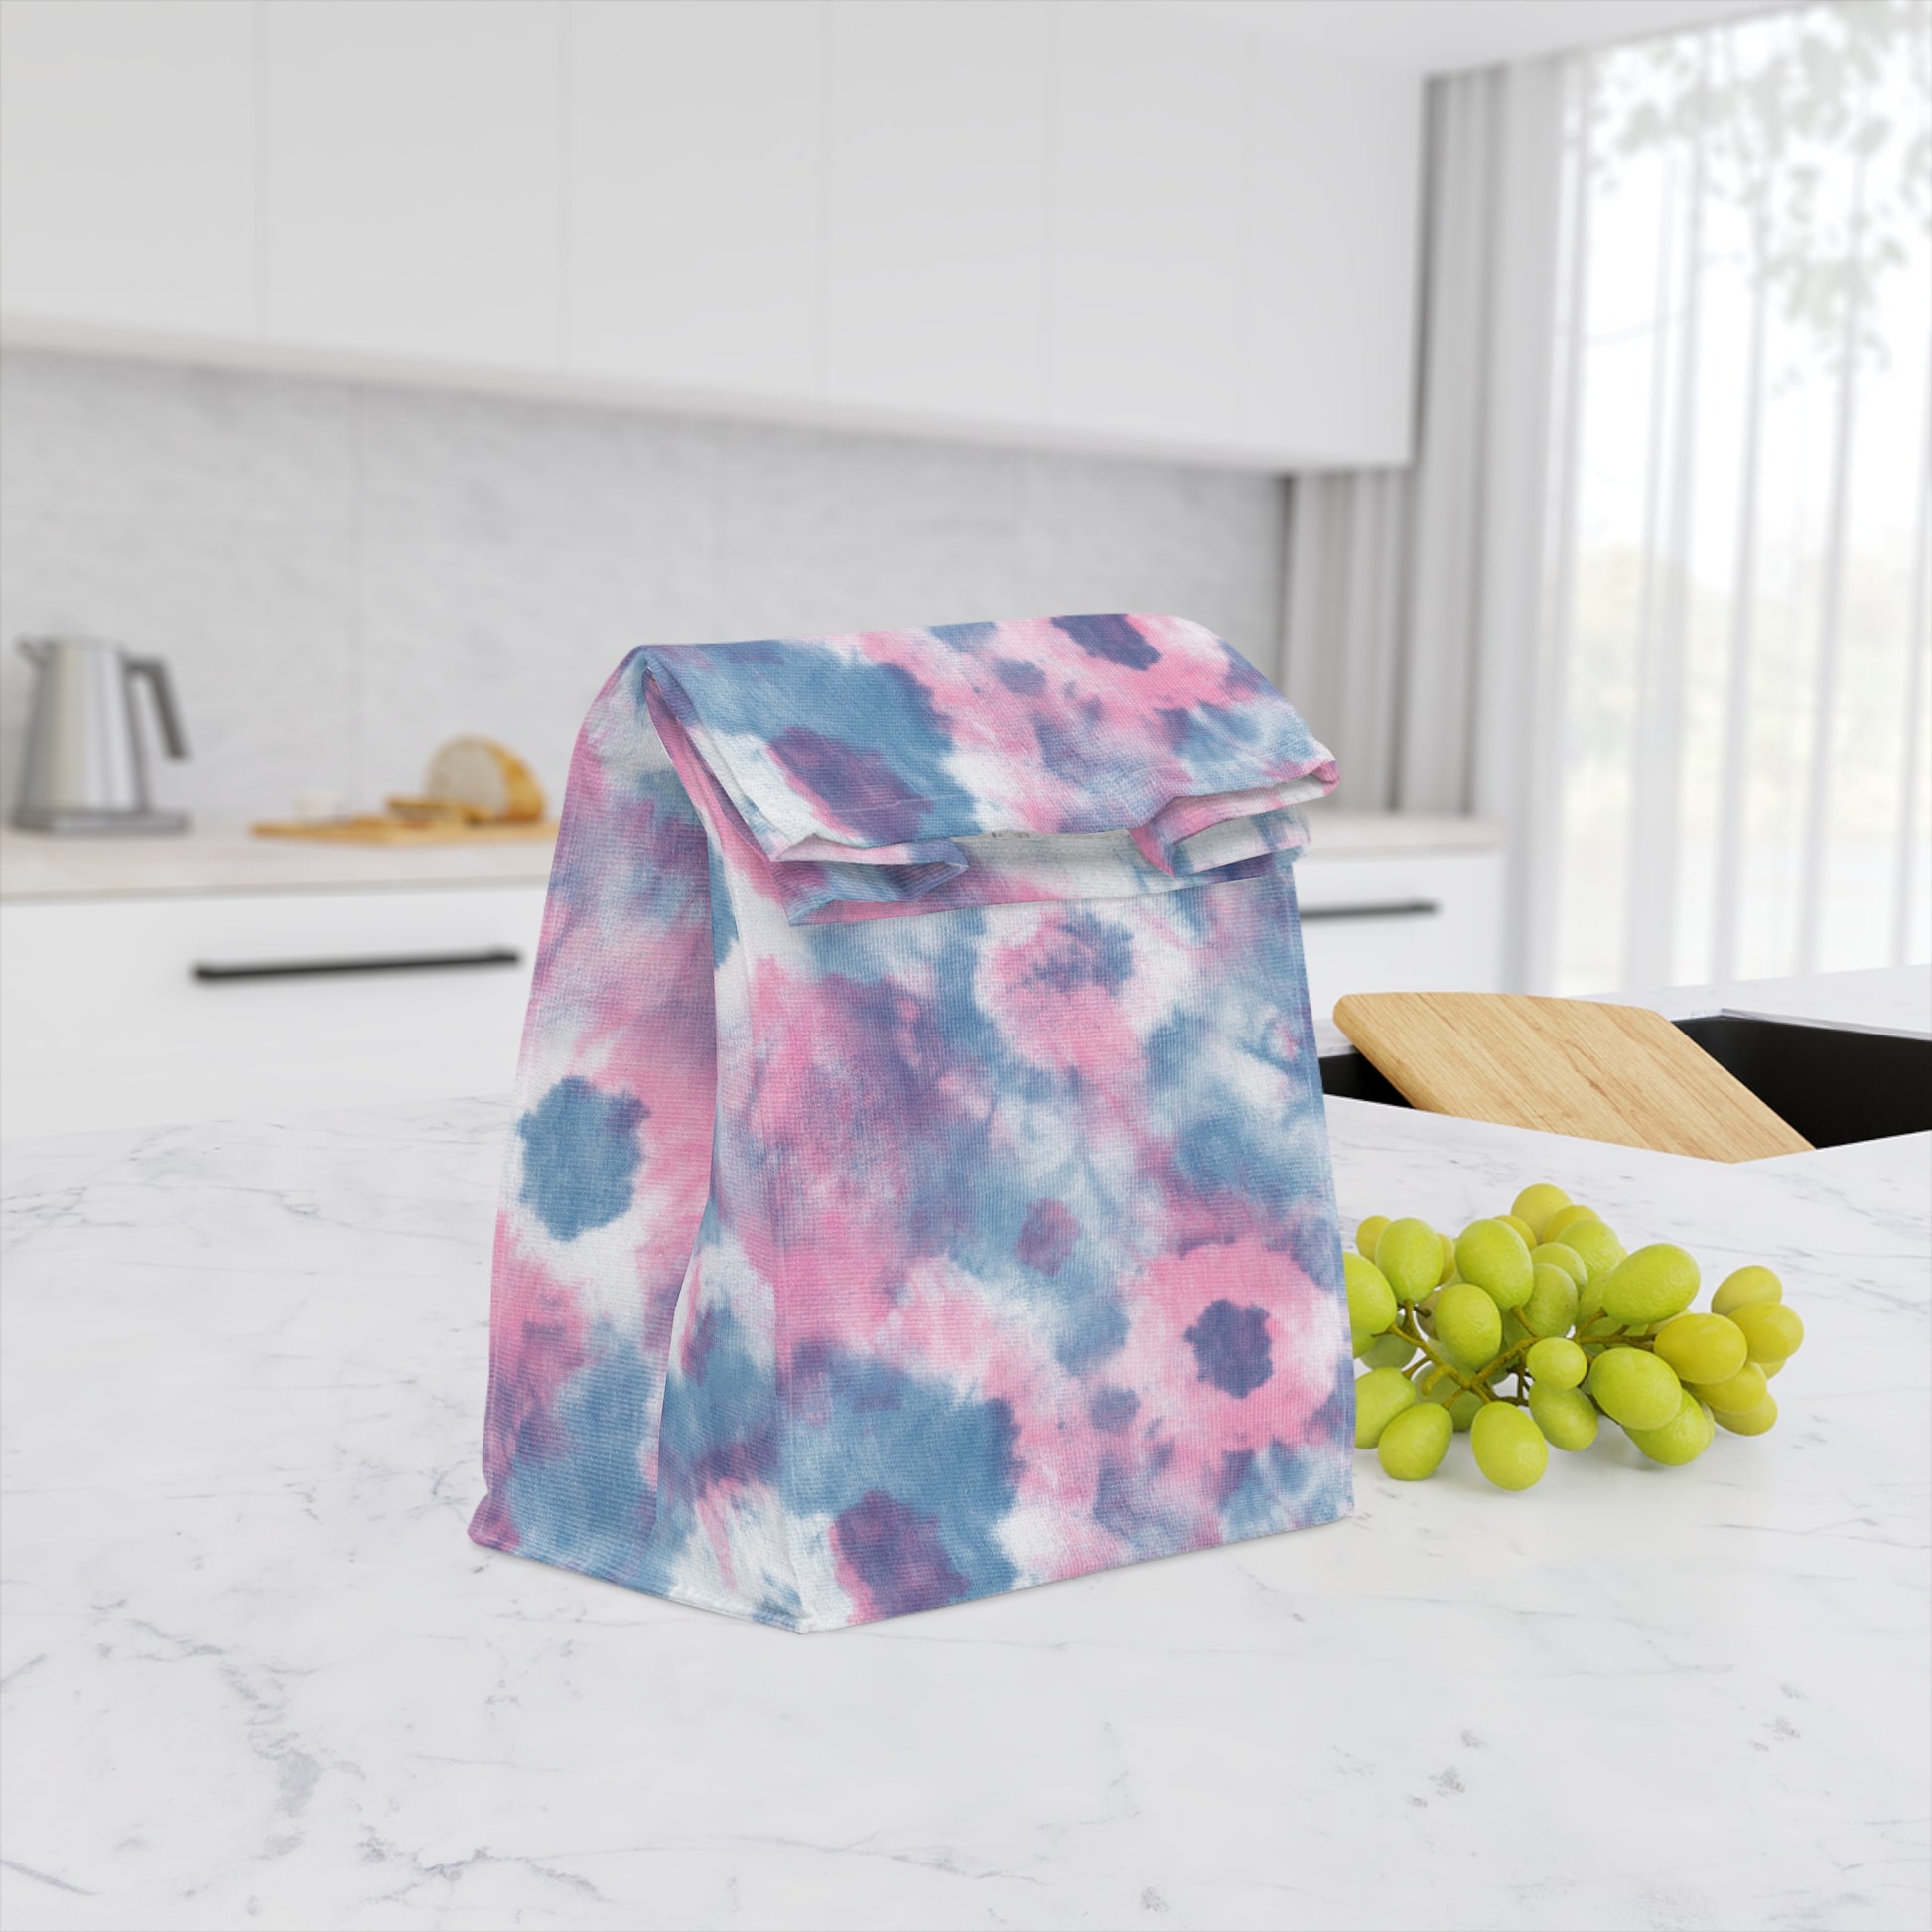 pink, blue and purple tie dye insulated lunch bag